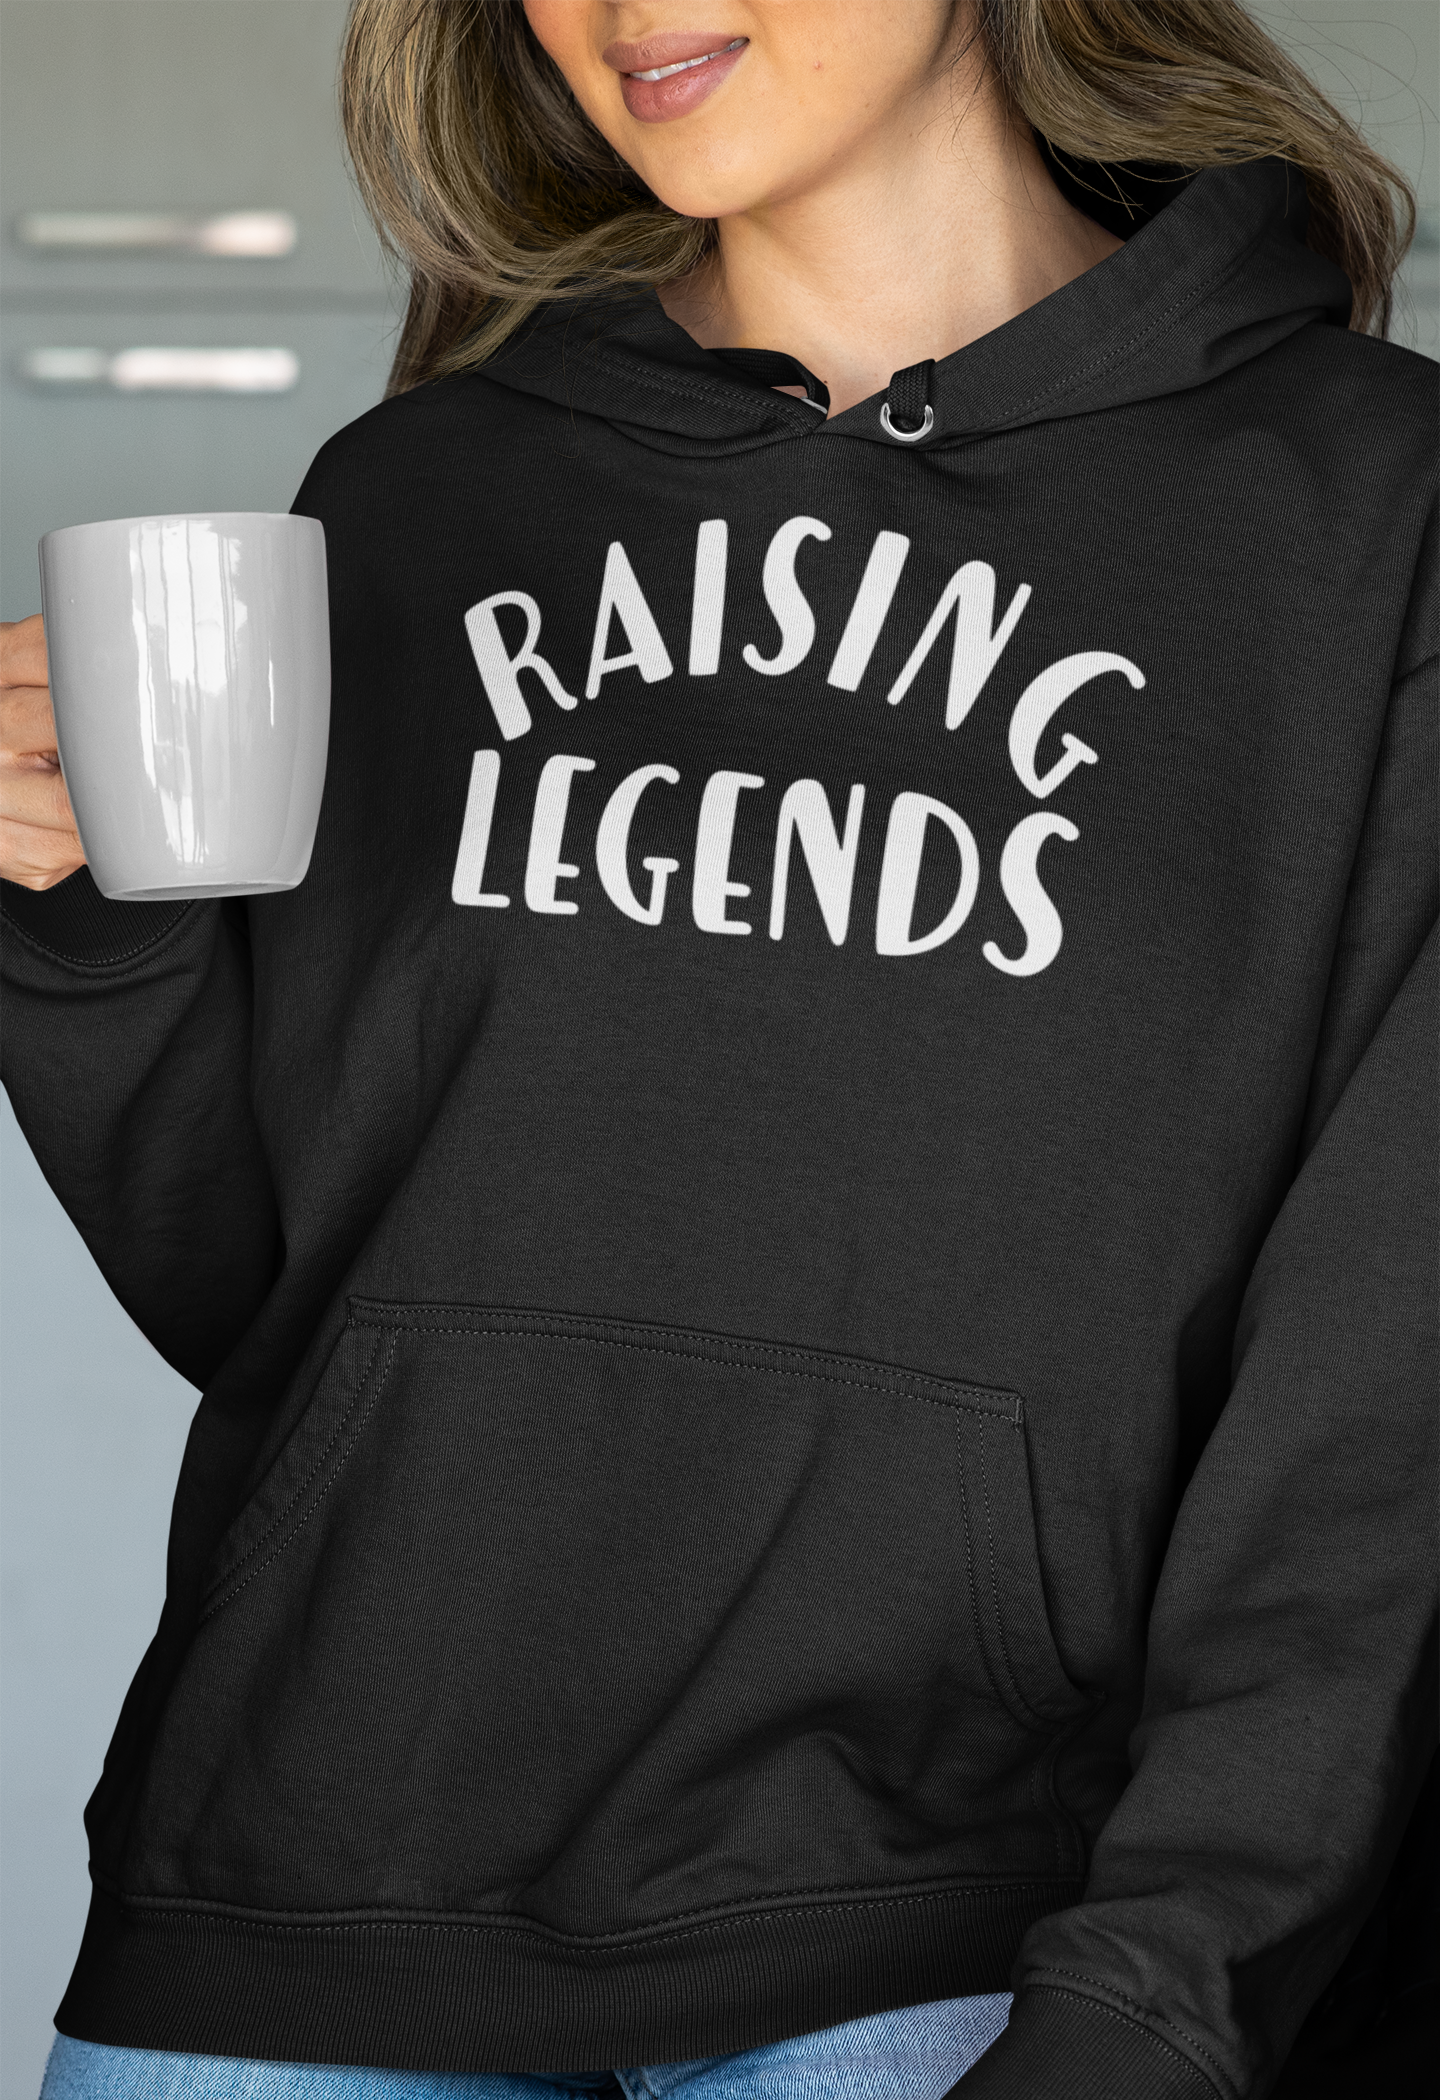 Raising Legends Black Sweatshirt Hoodie - Front ViewRaising Legends - Hooded Sweatshirt in black with white writing. Raising is curve at the top and legends is straight on the bottom. Features an innovative print process that raises the ink for a more defined design. This is the front view of the sweatshirt on a model holding a cup of coffee and posing.